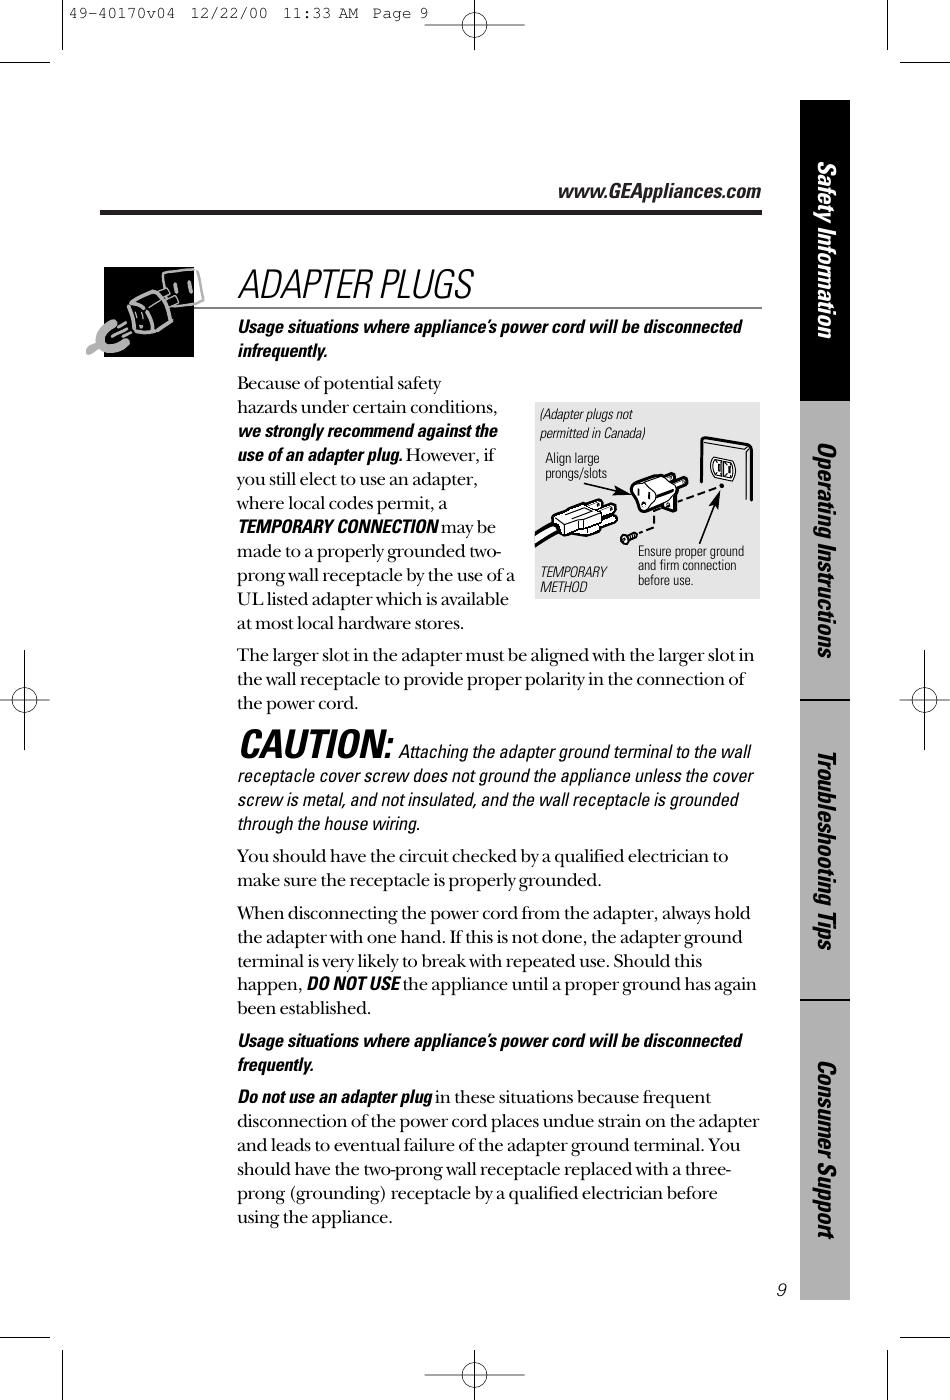 www.GEAppliances.comConsumer SupportTroubleshooting TipsOperating InstructionsSafety InformationUsage situations where appliance’s power cord will be disconnectedinfrequently.Because of potential safety hazards under certain conditions,we strongly recommend against the use of an adapter plug.However, if you still elect to use an adapter, where local codes permit, aTEMPORARY CONNECTIONmay bemade to a properly grounded two-prong wall receptacle by the use of aUL listed adapter which is available at most local hardware stores.The larger slot in the adapter must be aligned with the larger slot inthe wall receptacle to provide proper polarity in the connection ofthe power cord.CAUTION:Attaching the adapter ground terminal to the wallreceptacle cover screw does not ground the appliance unless the coverscrew is metal, and not insulated, and the wall receptacle is groundedthrough the house wiring. You should have the circuit checked by a qualified electrician tomake sure the receptacle is properly grounded.When disconnecting the power cord from the adapter, always holdthe adapter with one hand. If this is not done, the adapter groundterminal is very likely to break with repeated use. Should thishappen, DO NOT USEthe appliance until a proper ground has againbeen established.Usage situations where appliance’s power cord will be disconnectedfrequently.Do not use an adapter plugin these situations because frequentdisconnection of the power cord places undue strain on the adapterand leads to eventual failure of the adapter ground terminal. Youshould have the two-prong wall receptacle replaced with a three-prong (grounding) receptacle by a qualified electrician beforeusing the appliance.ADAPTER PLUGS9Ensure proper ground and firm connectionbefore use.TEMPORARYMETHODAlign largeprongs/slots(Adapter plugs notpermitted in Canada)49-40170v04  12/22/00  11:33 AM  Page 9